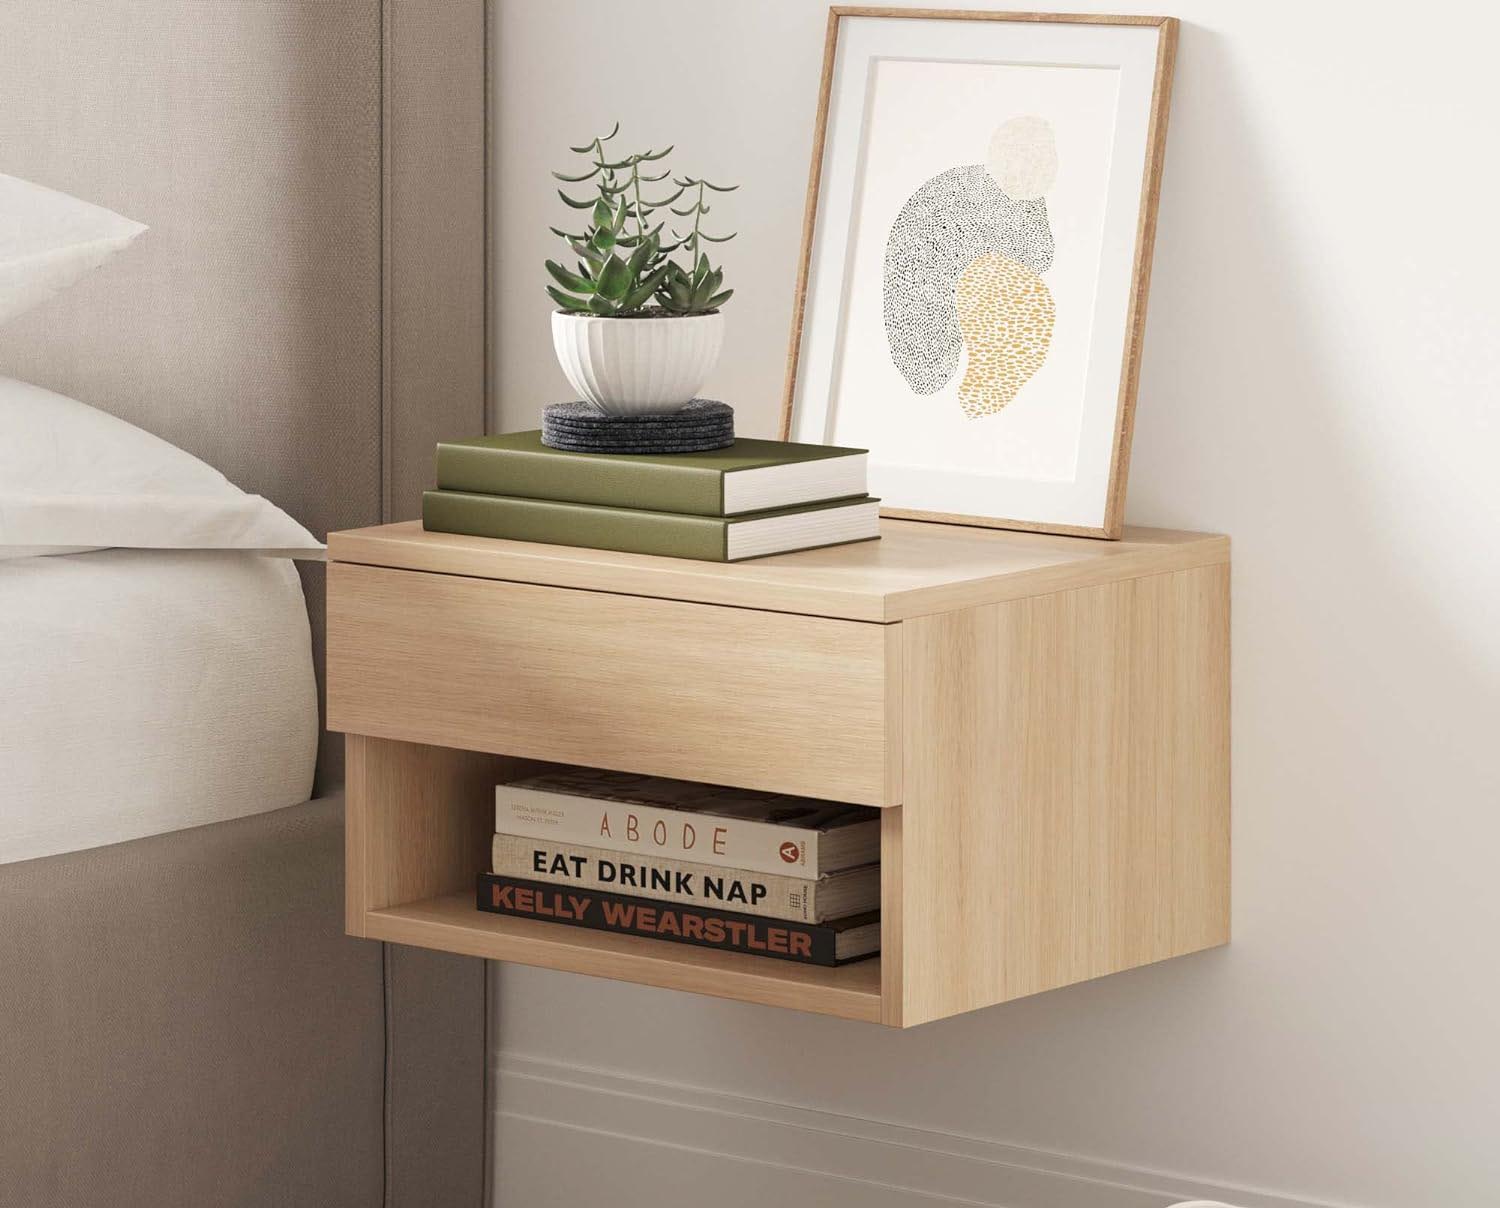 Pieces of Furniture That Will Make Any Room Feel Bigger Option Wall-Mounted Night Stand